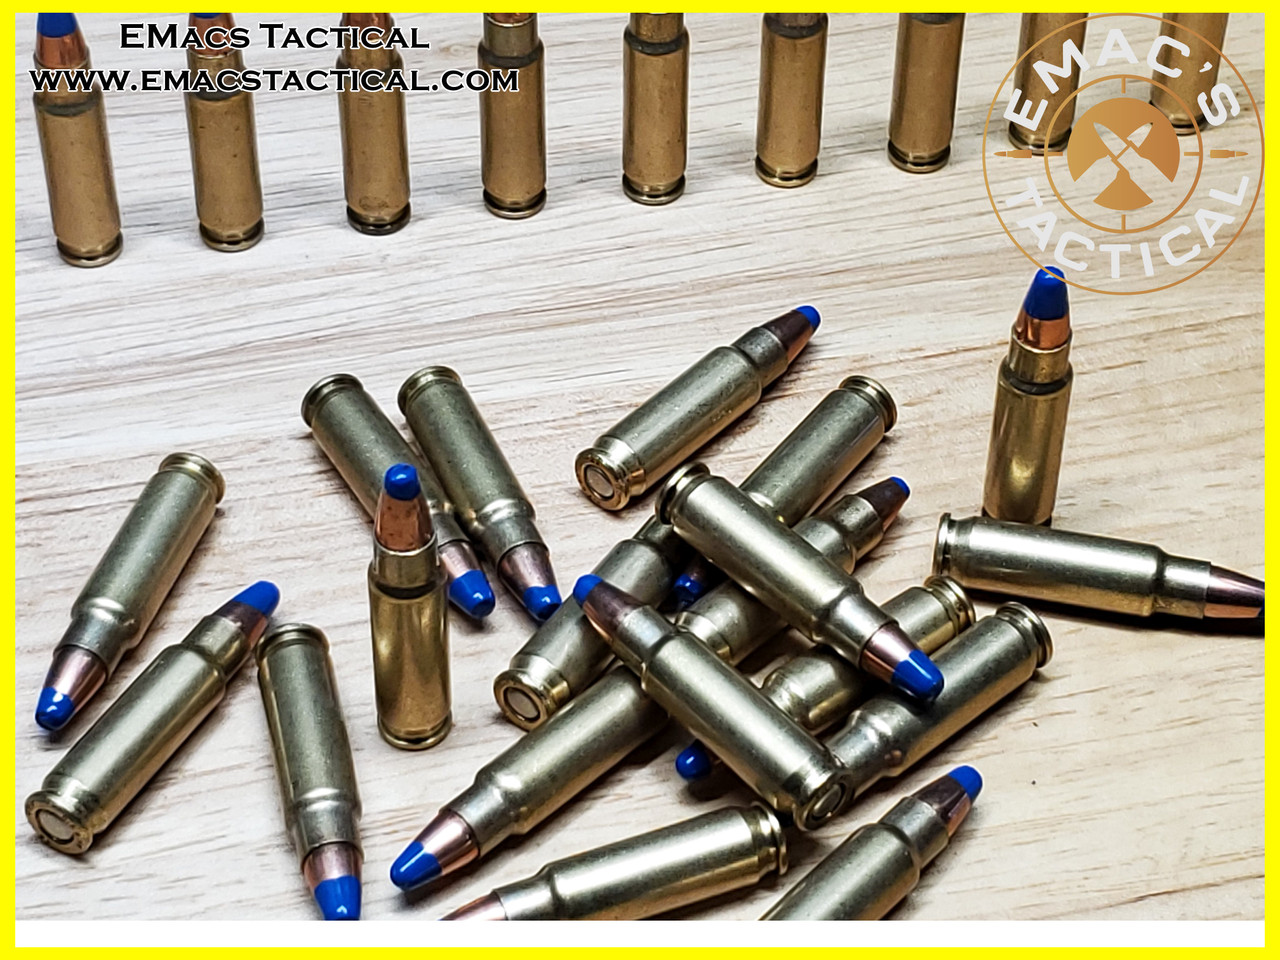 5.7x28 Heavy Incendiary Specialty Ammunition [20x Count]